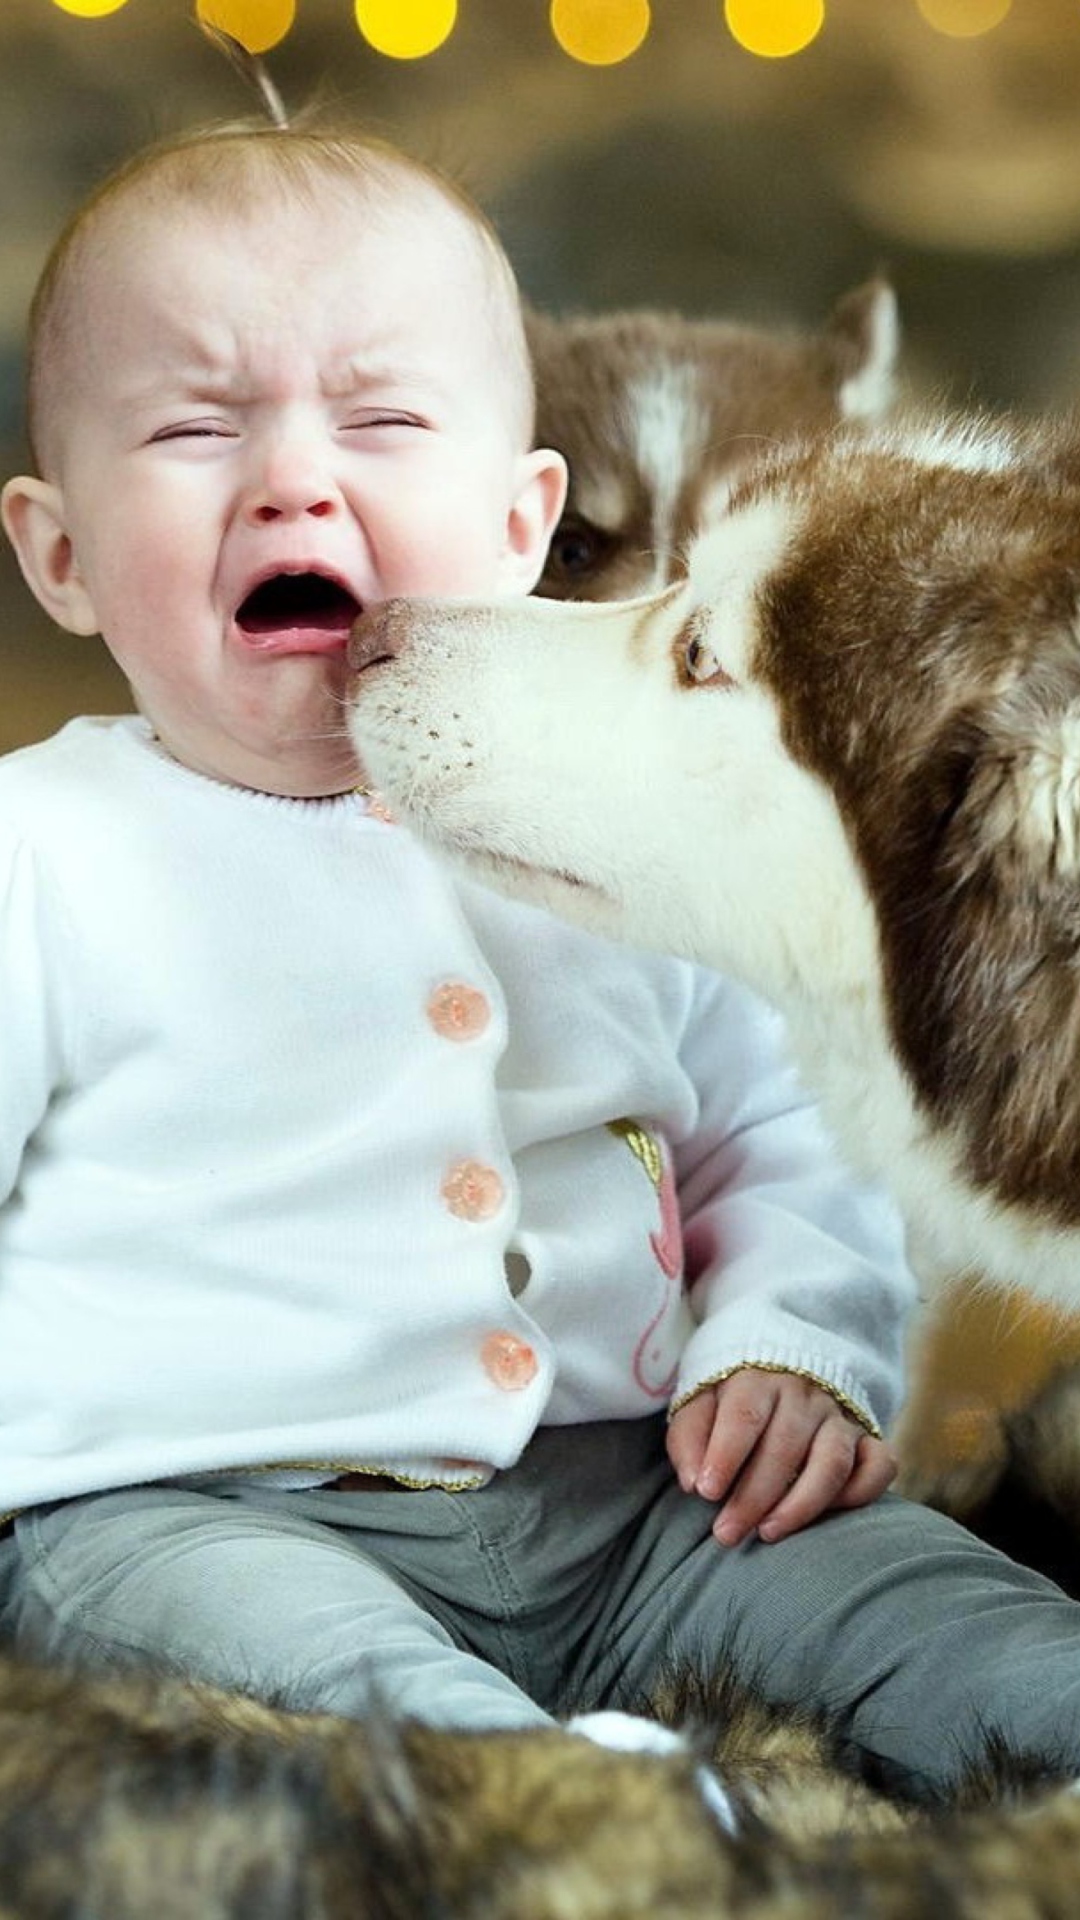 Das Baby and Dog Wallpaper 1080x1920